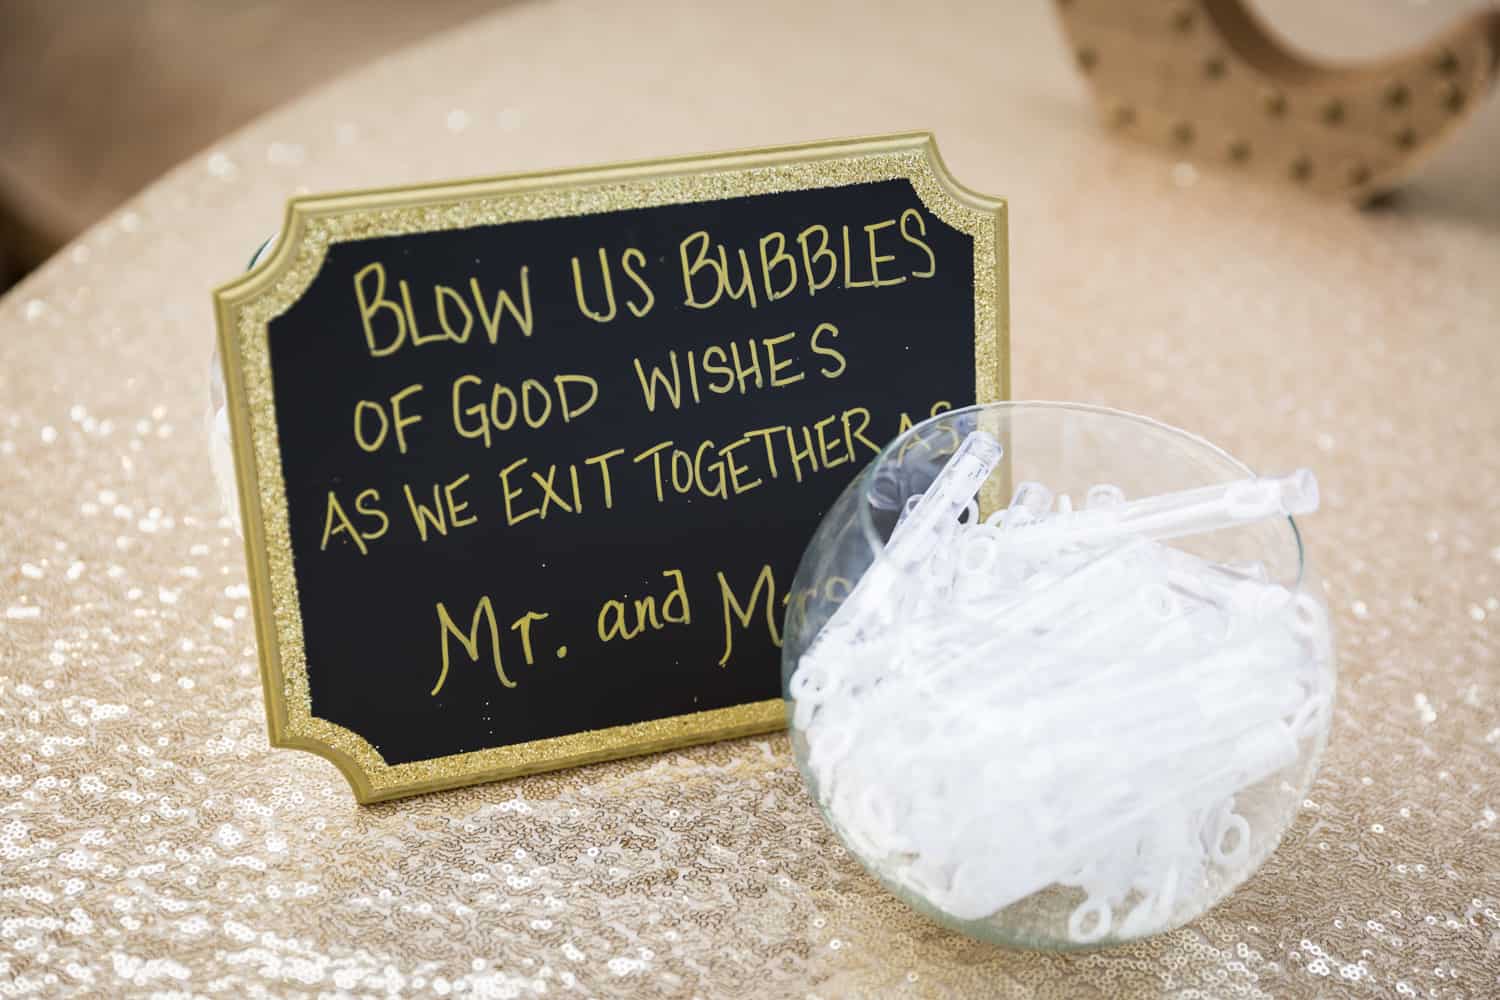 Bowl of bubbles with sign for guests